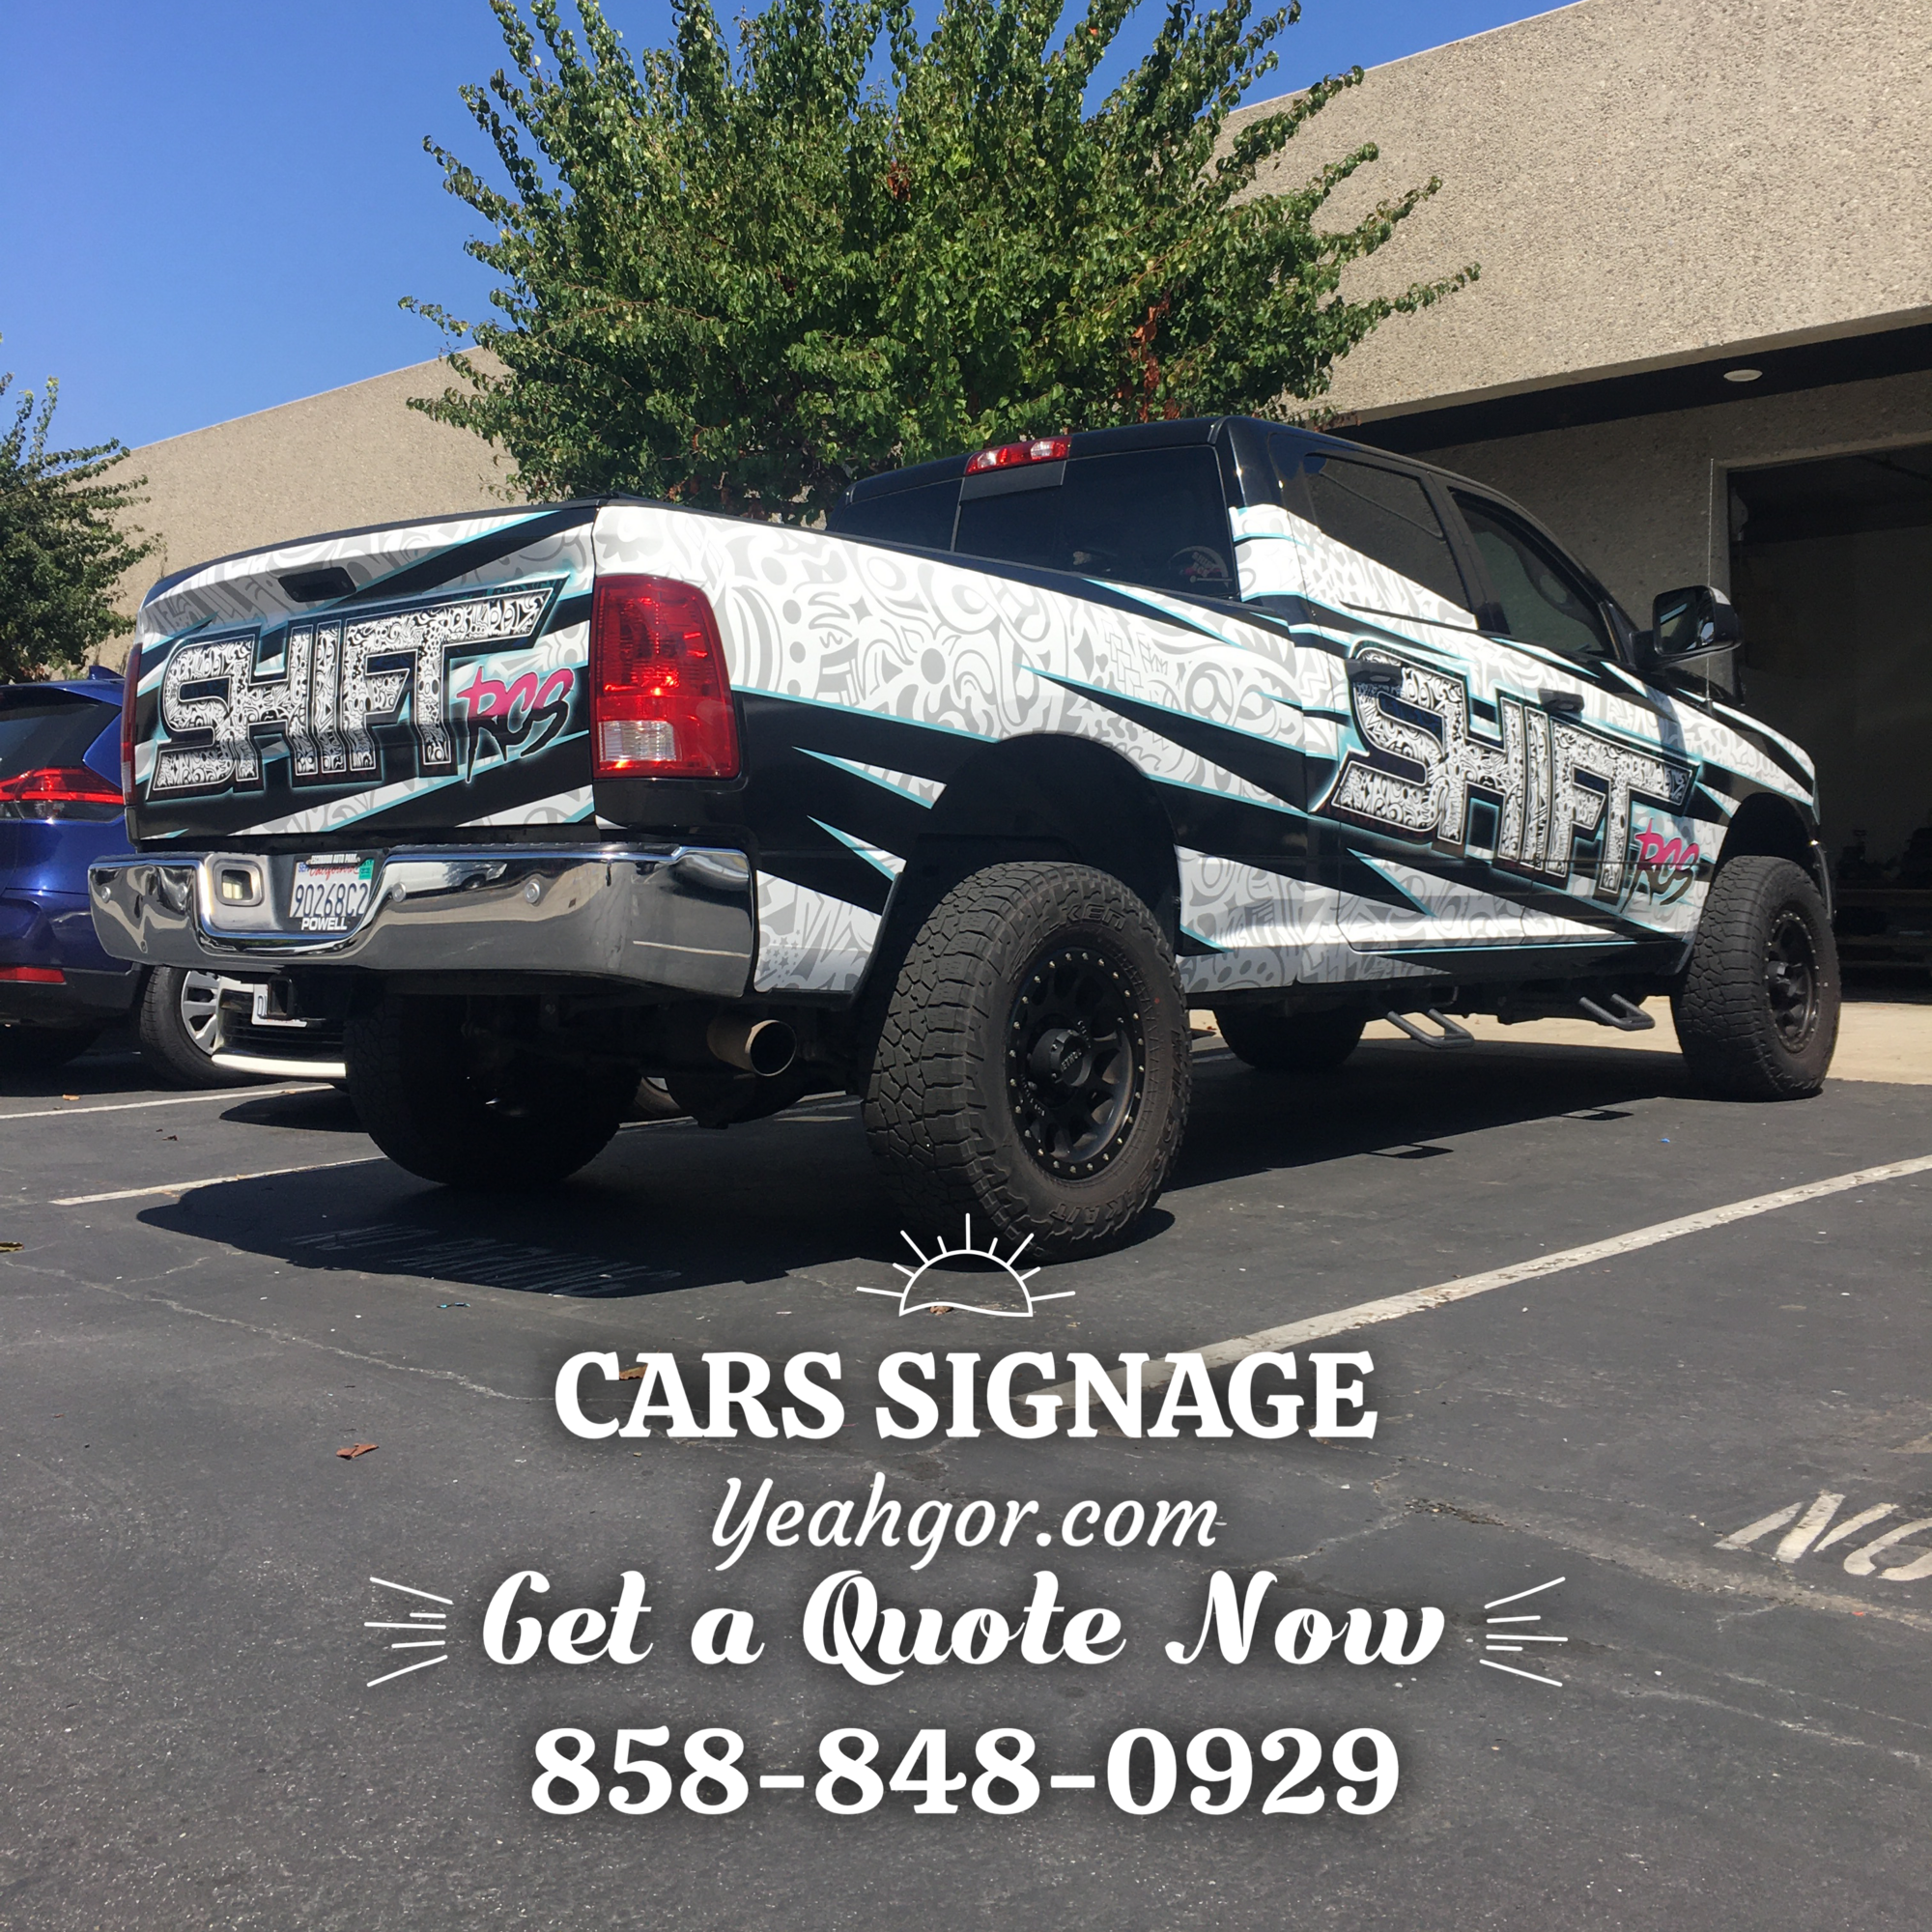 Santee, CA – Vehicle Graphics and Car Signage San Diego for Small Businesses DM for details Are you looking to take your business to the next level with car signage?